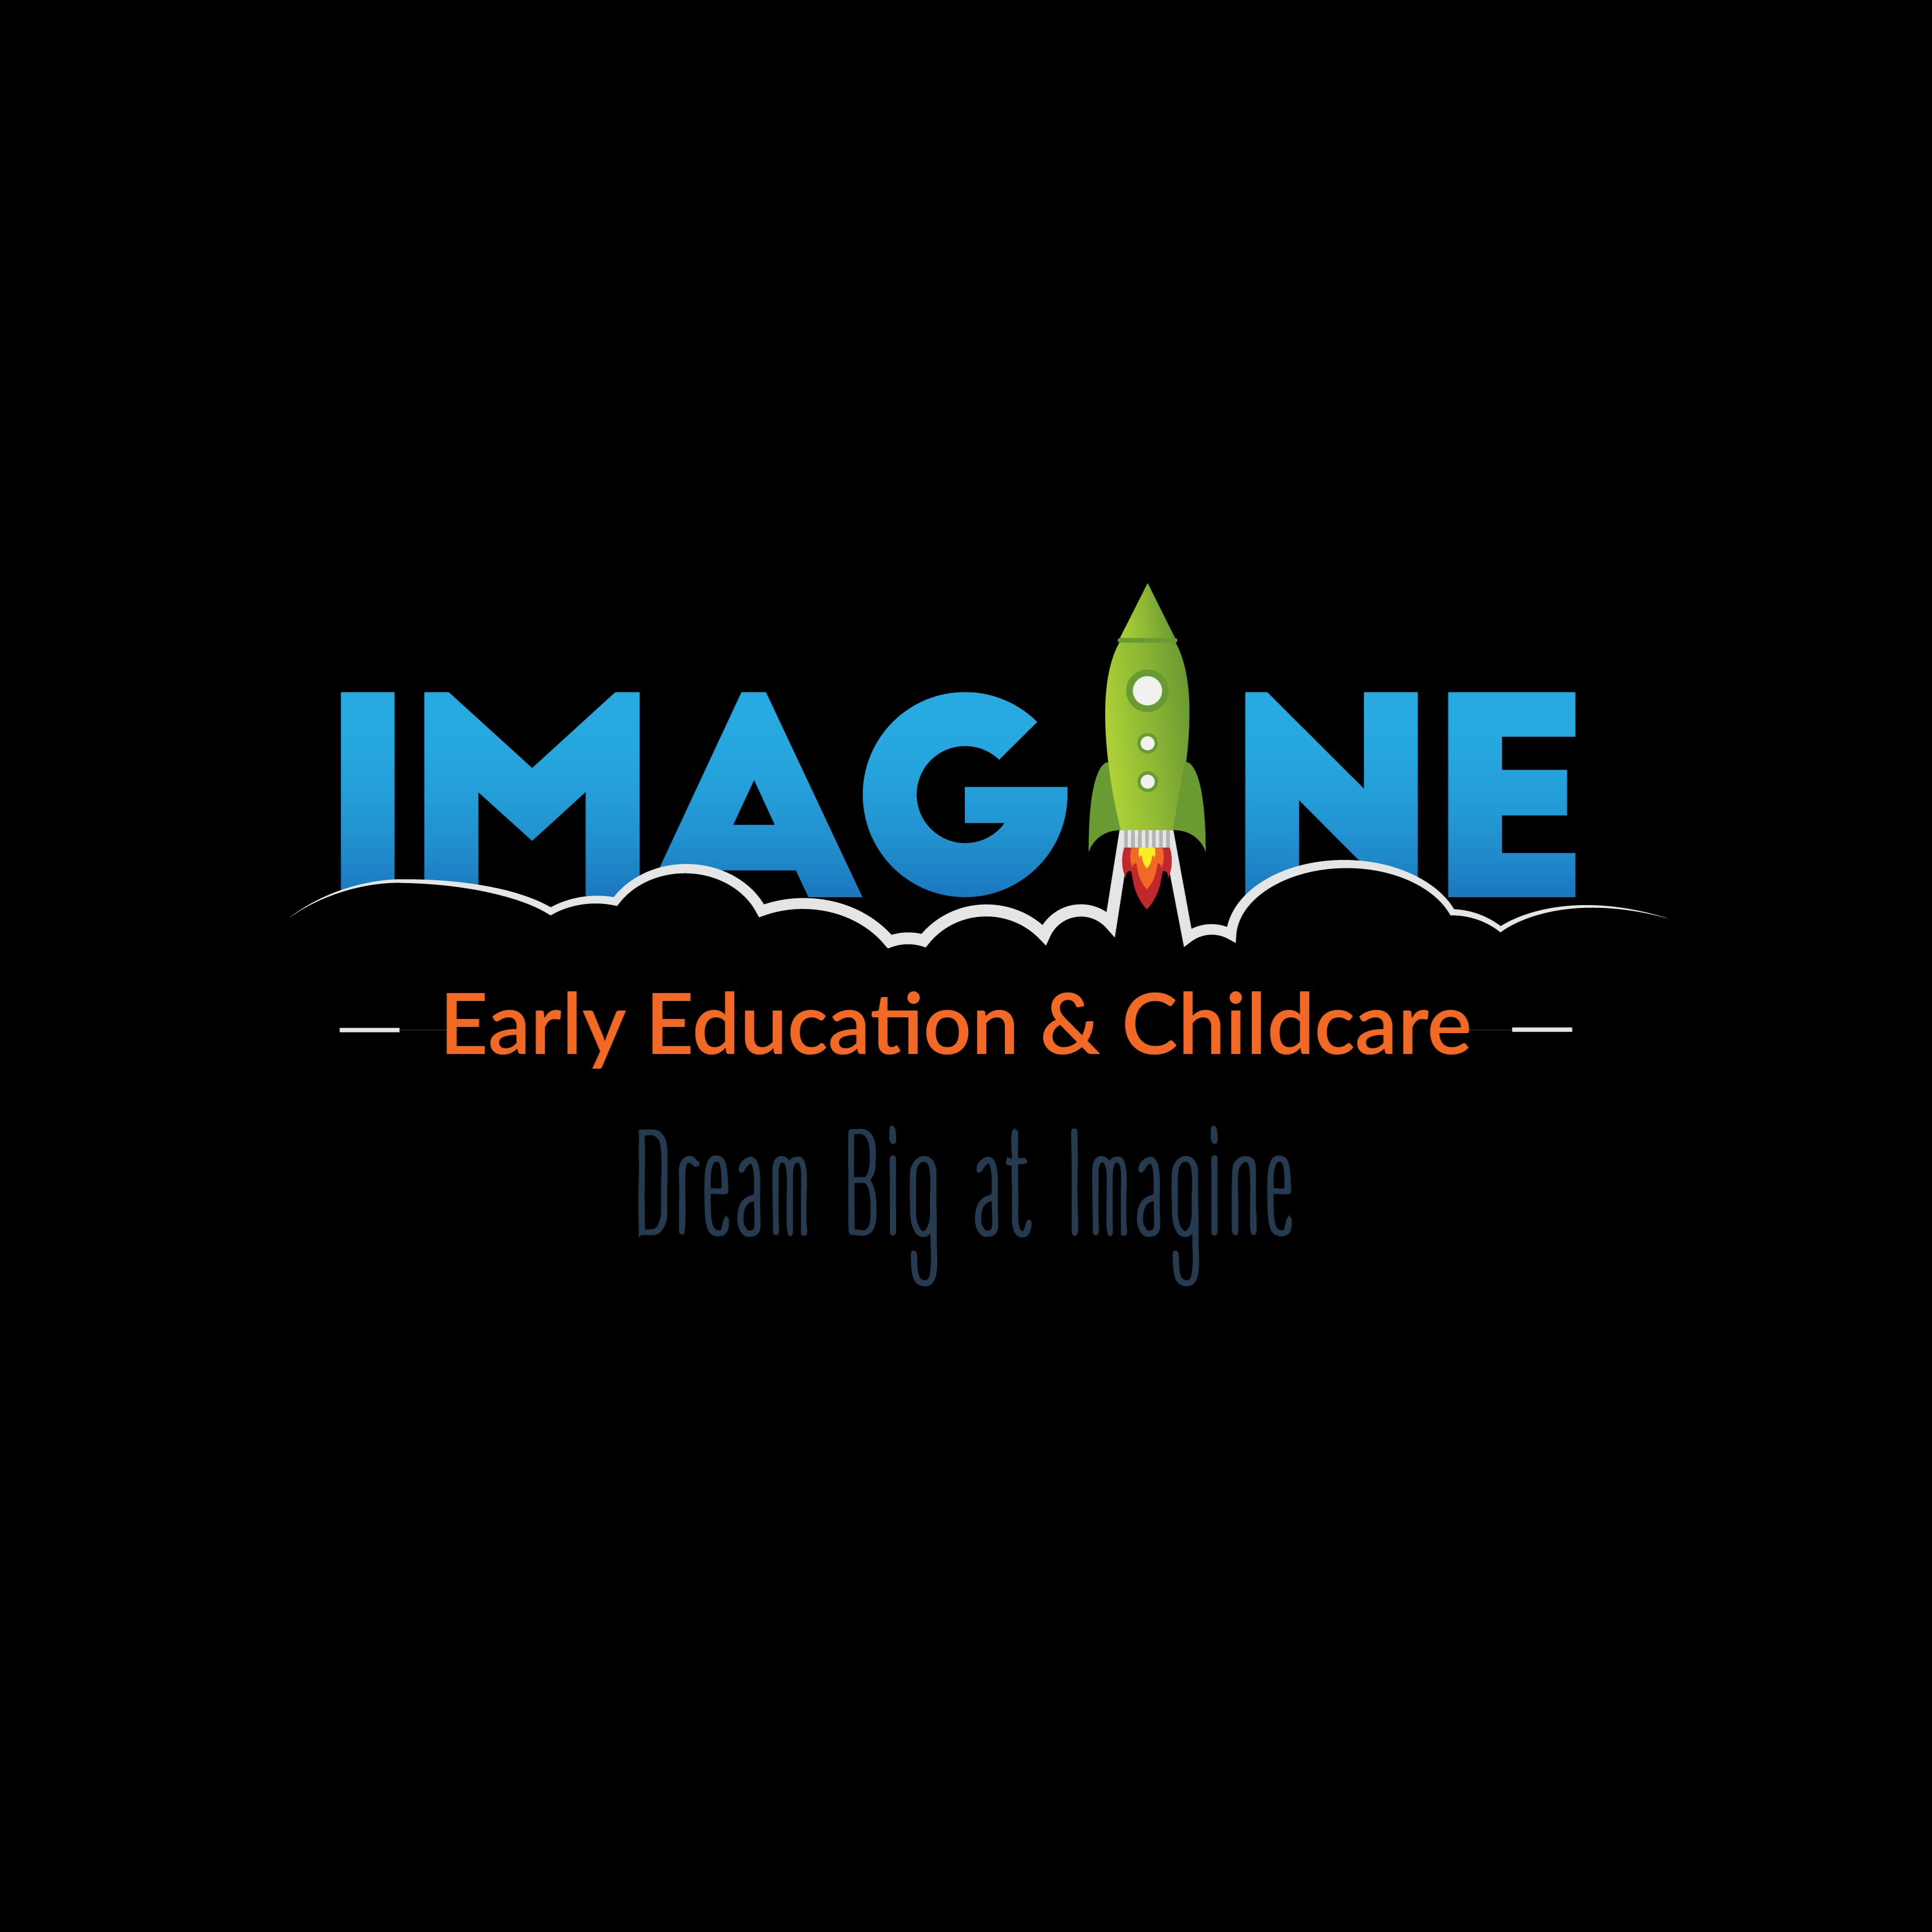 Imagine Early Education & Childcare of Tulsa